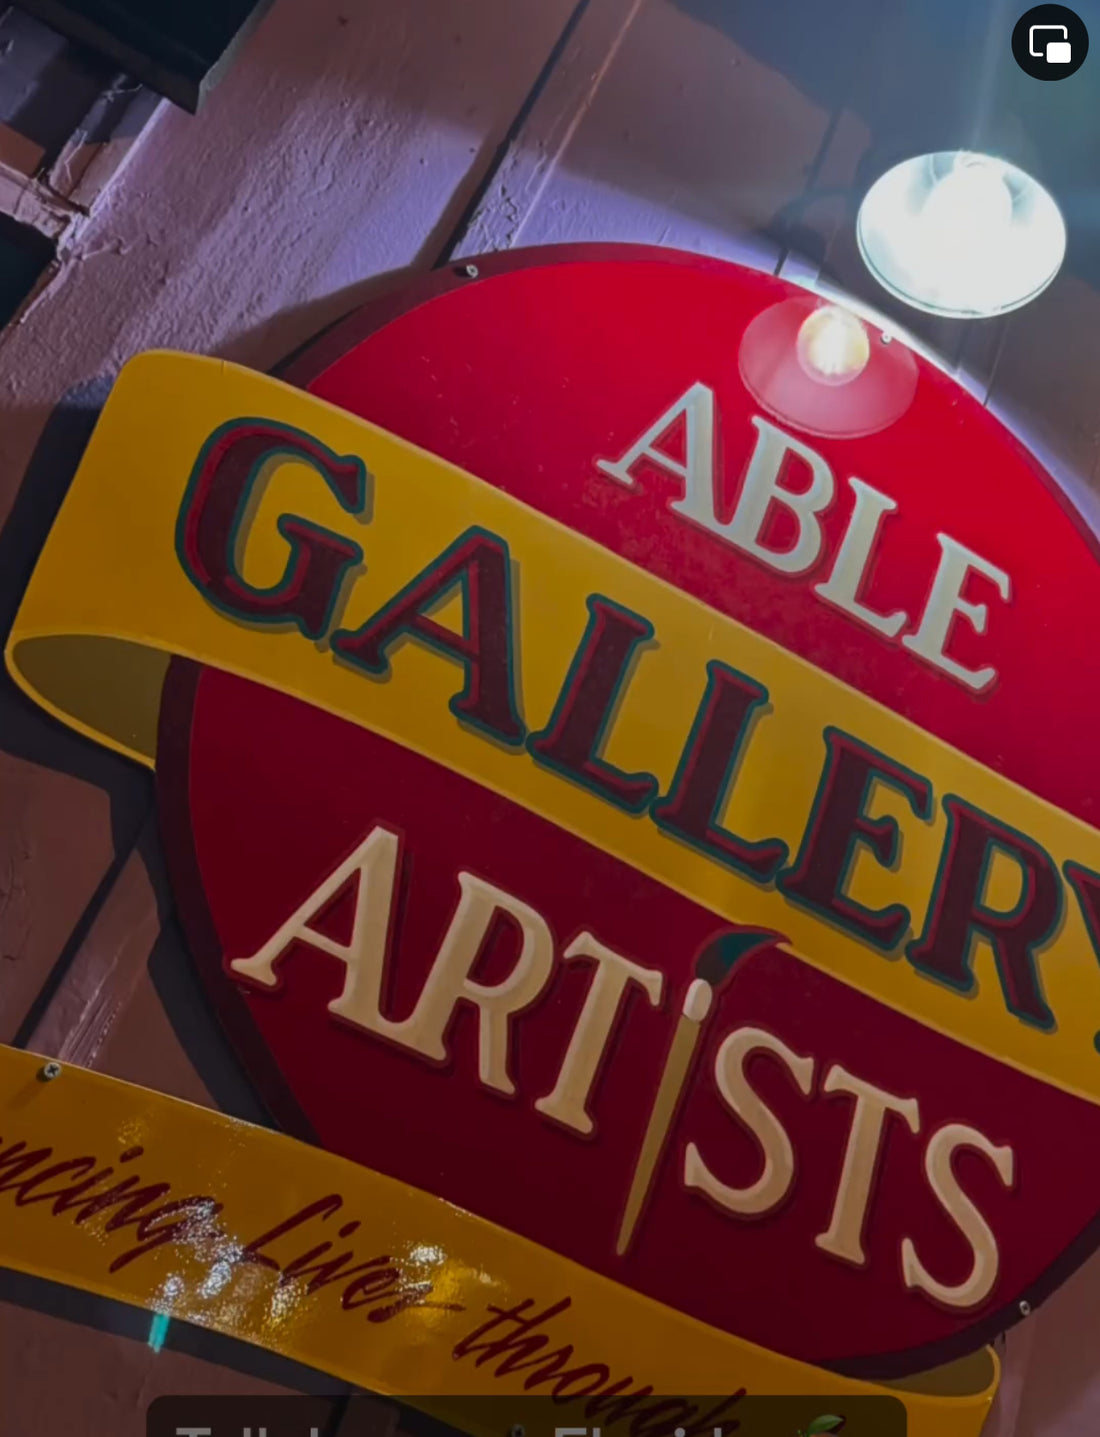 Bringing art to the heart of Tallahassee, Florida